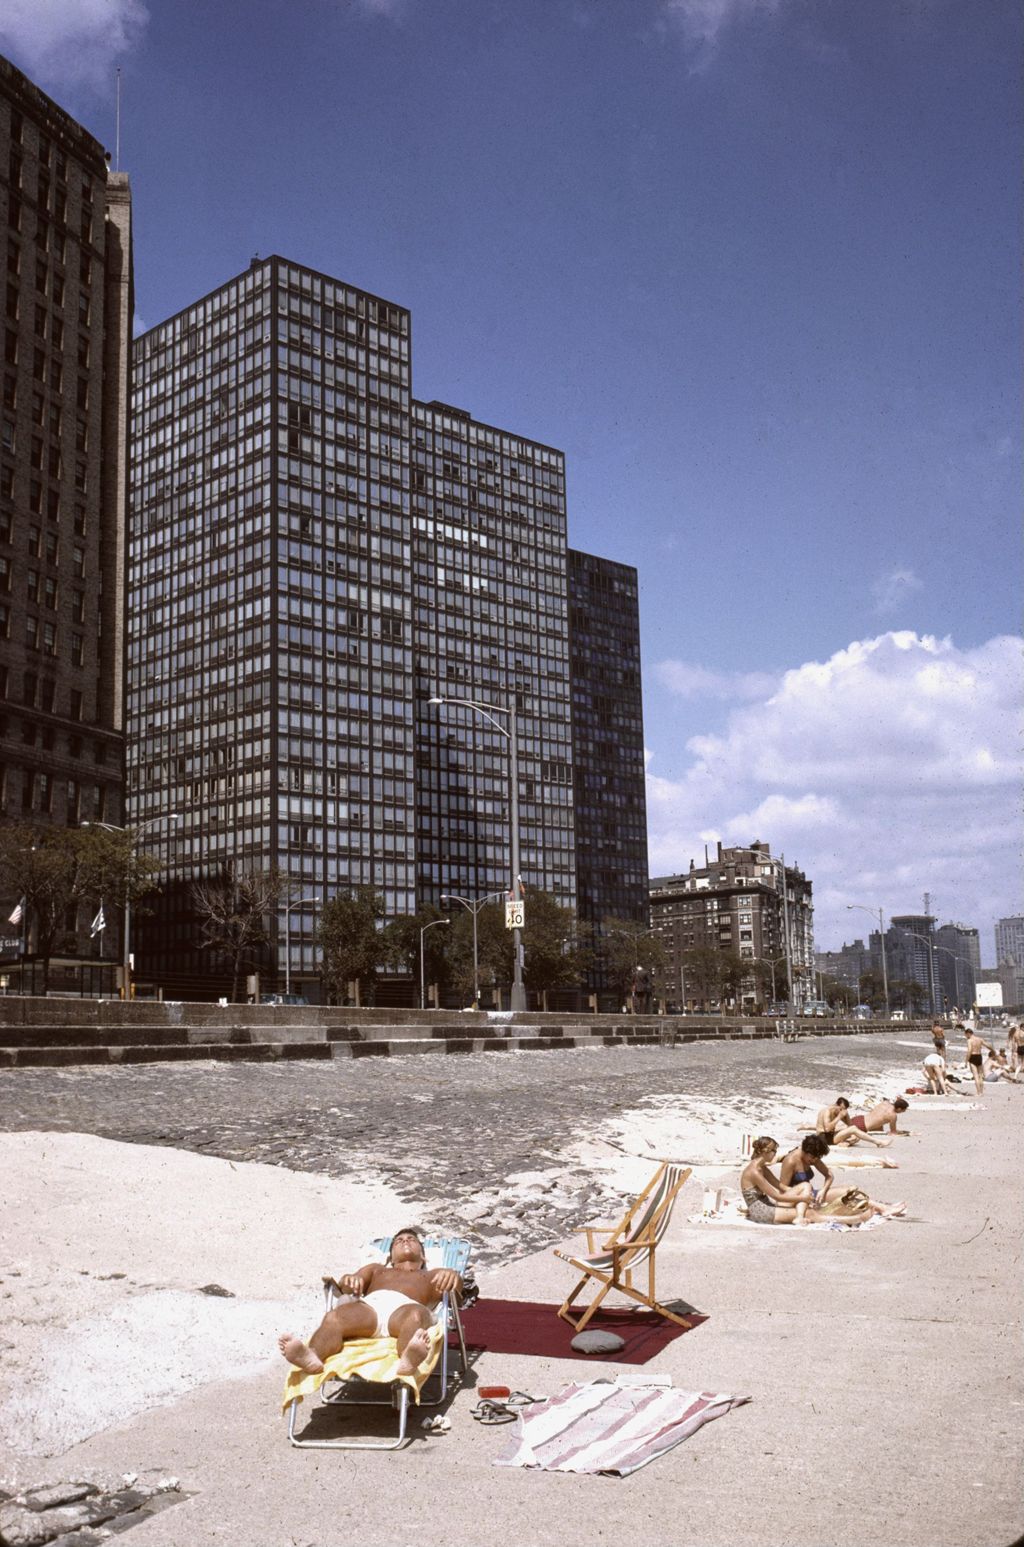 860-880 N. Lake Shore Drive apartments from the beach